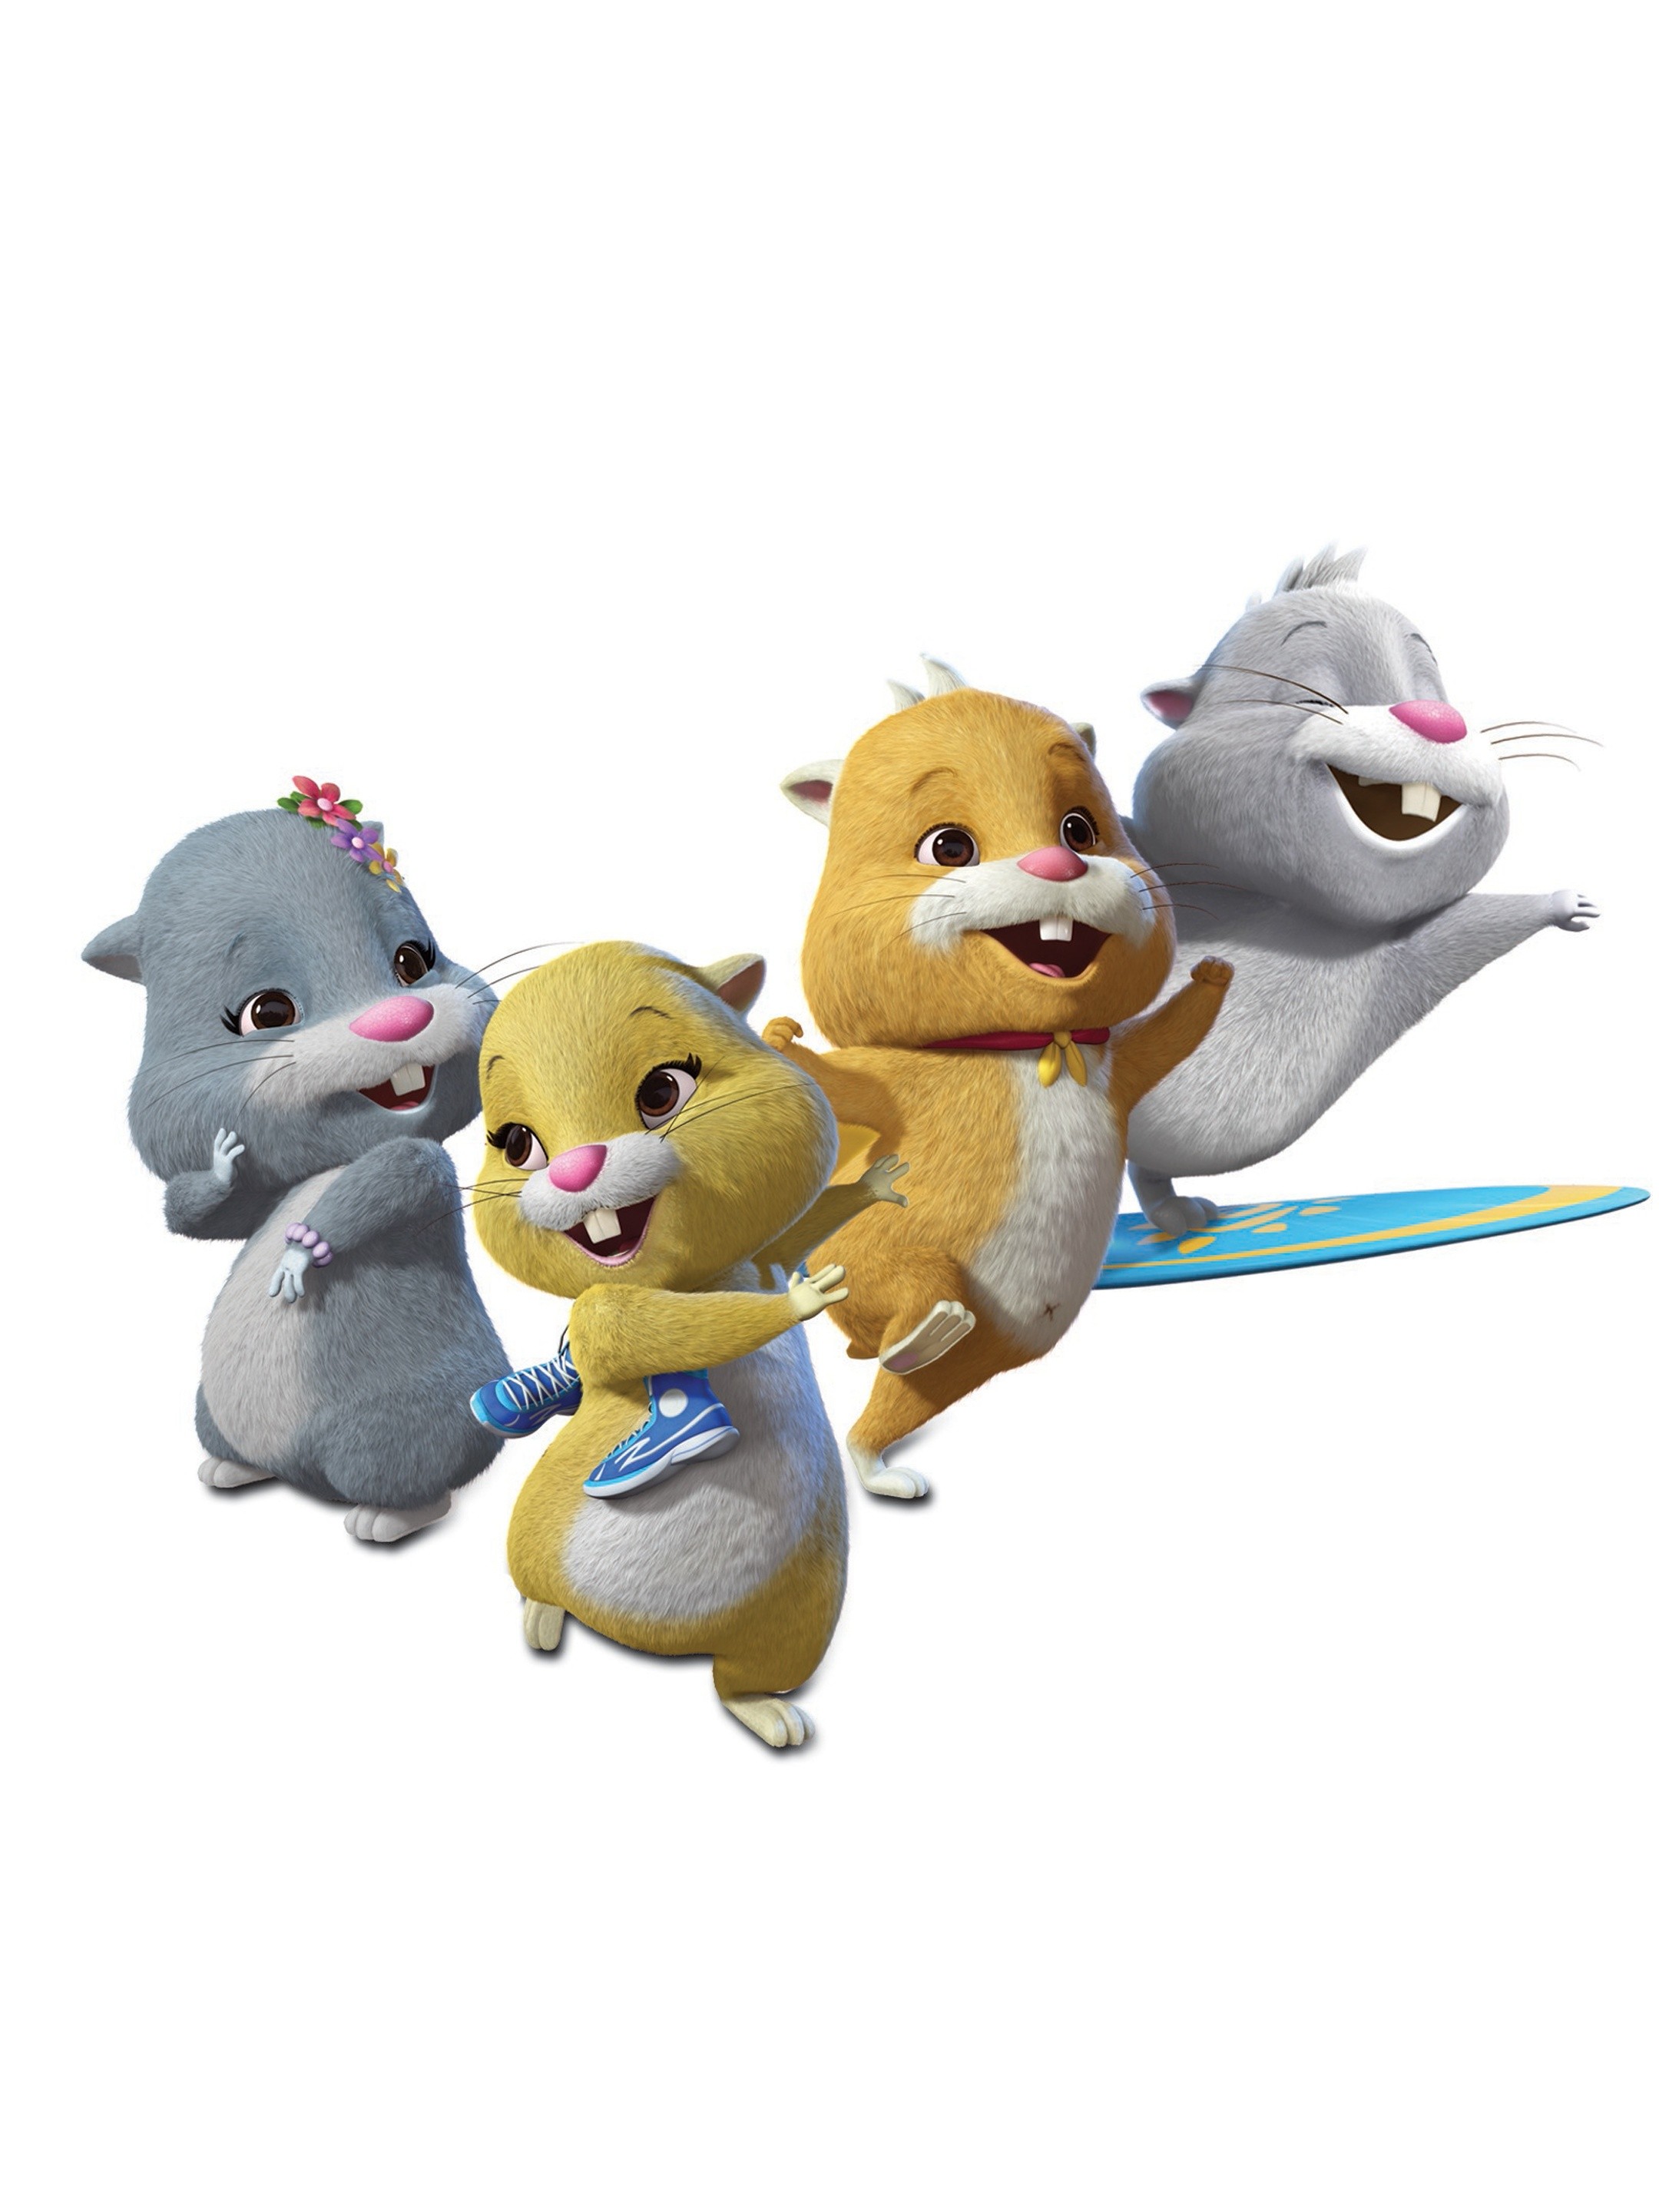 ZhuZhu Pets: Quest for Zhu - Where to Watch and Stream - TV Guide